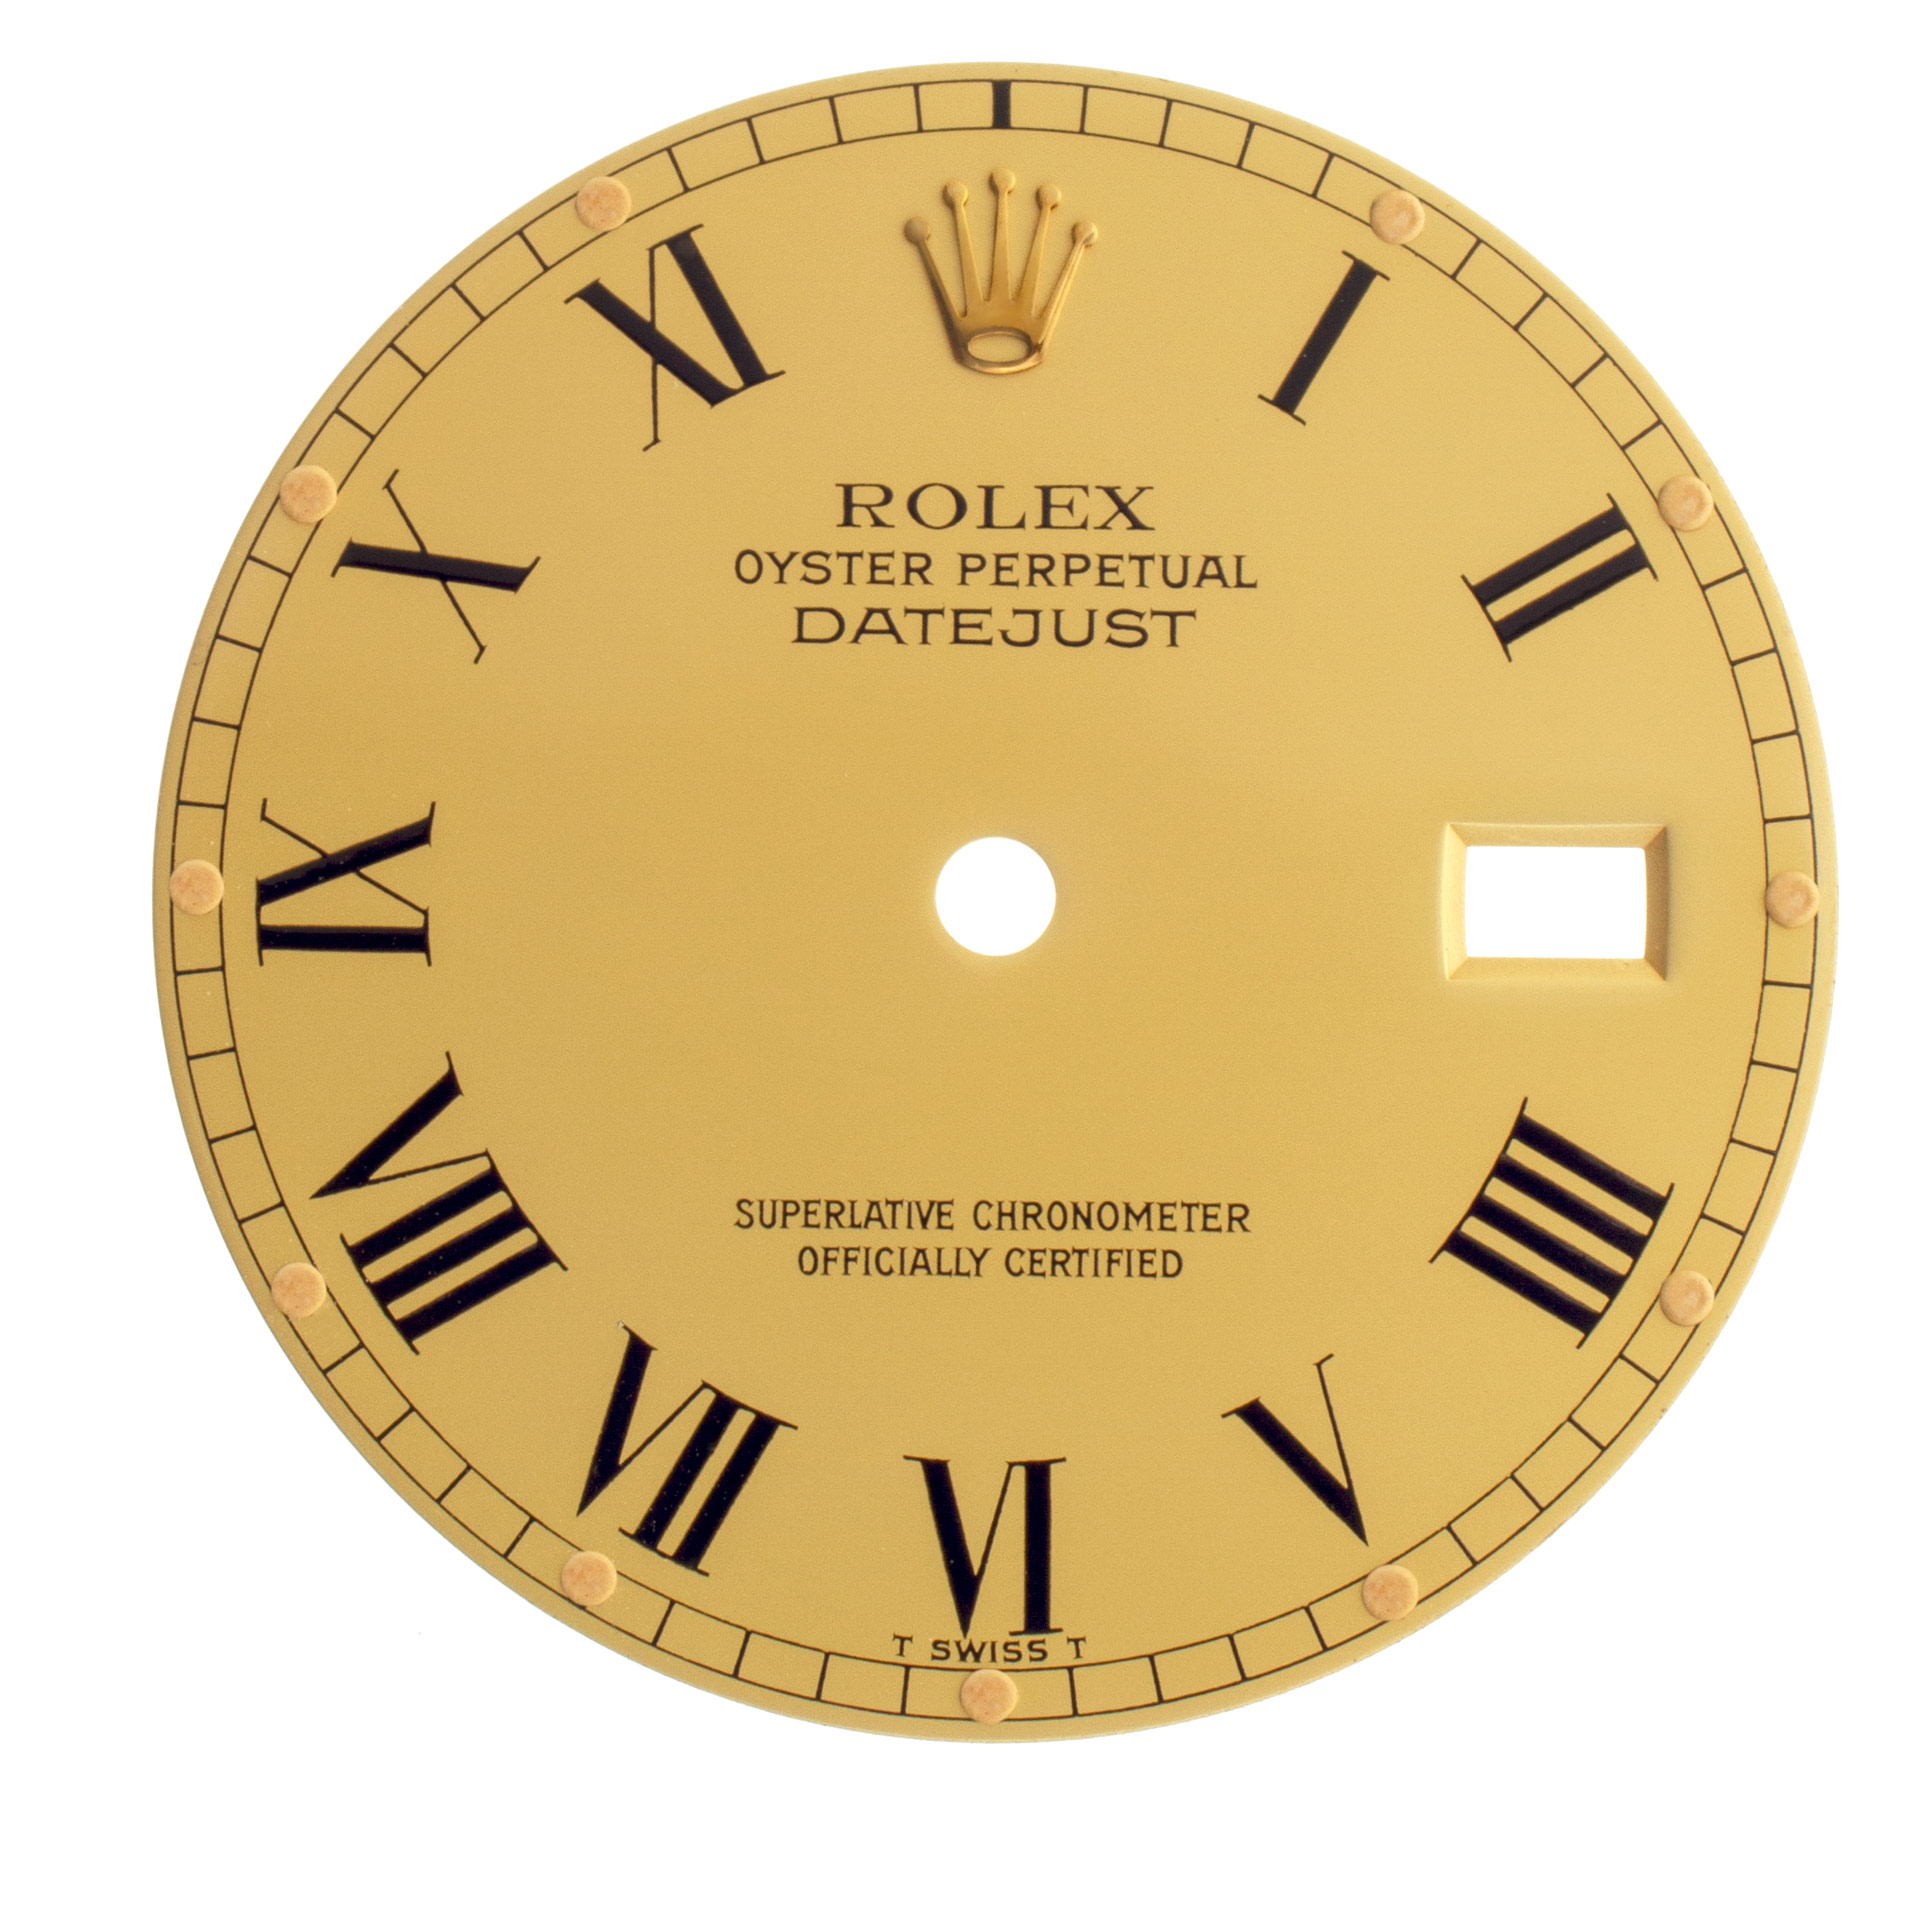 Rolex Datejust gold Roman numeral dial image 1